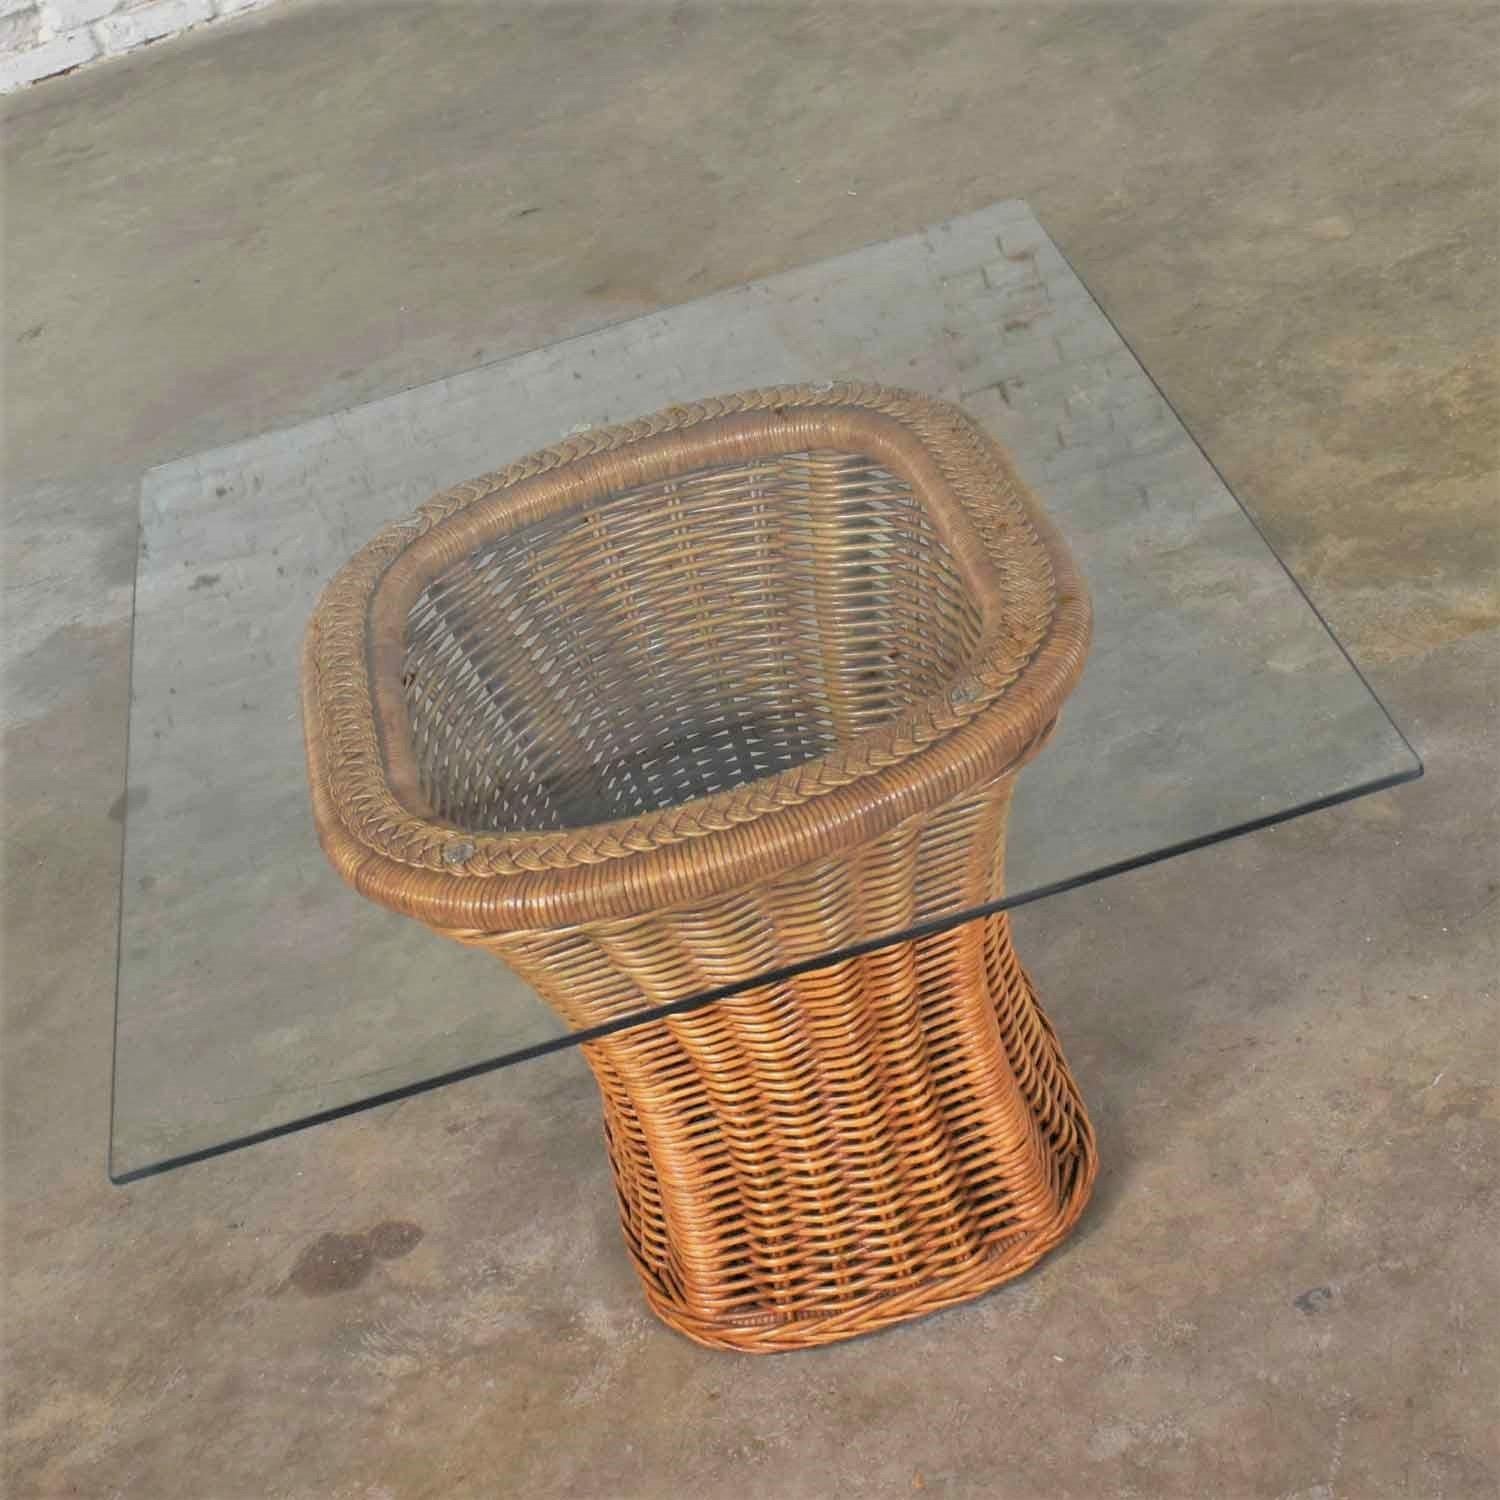 Handsome vintage organic modern woven wicker rattan end or side table fitted with a rectangular glass top. It is in wonderful vintage condition with no outstanding flaws we have detected. The glass top may have some minor scratches as you would